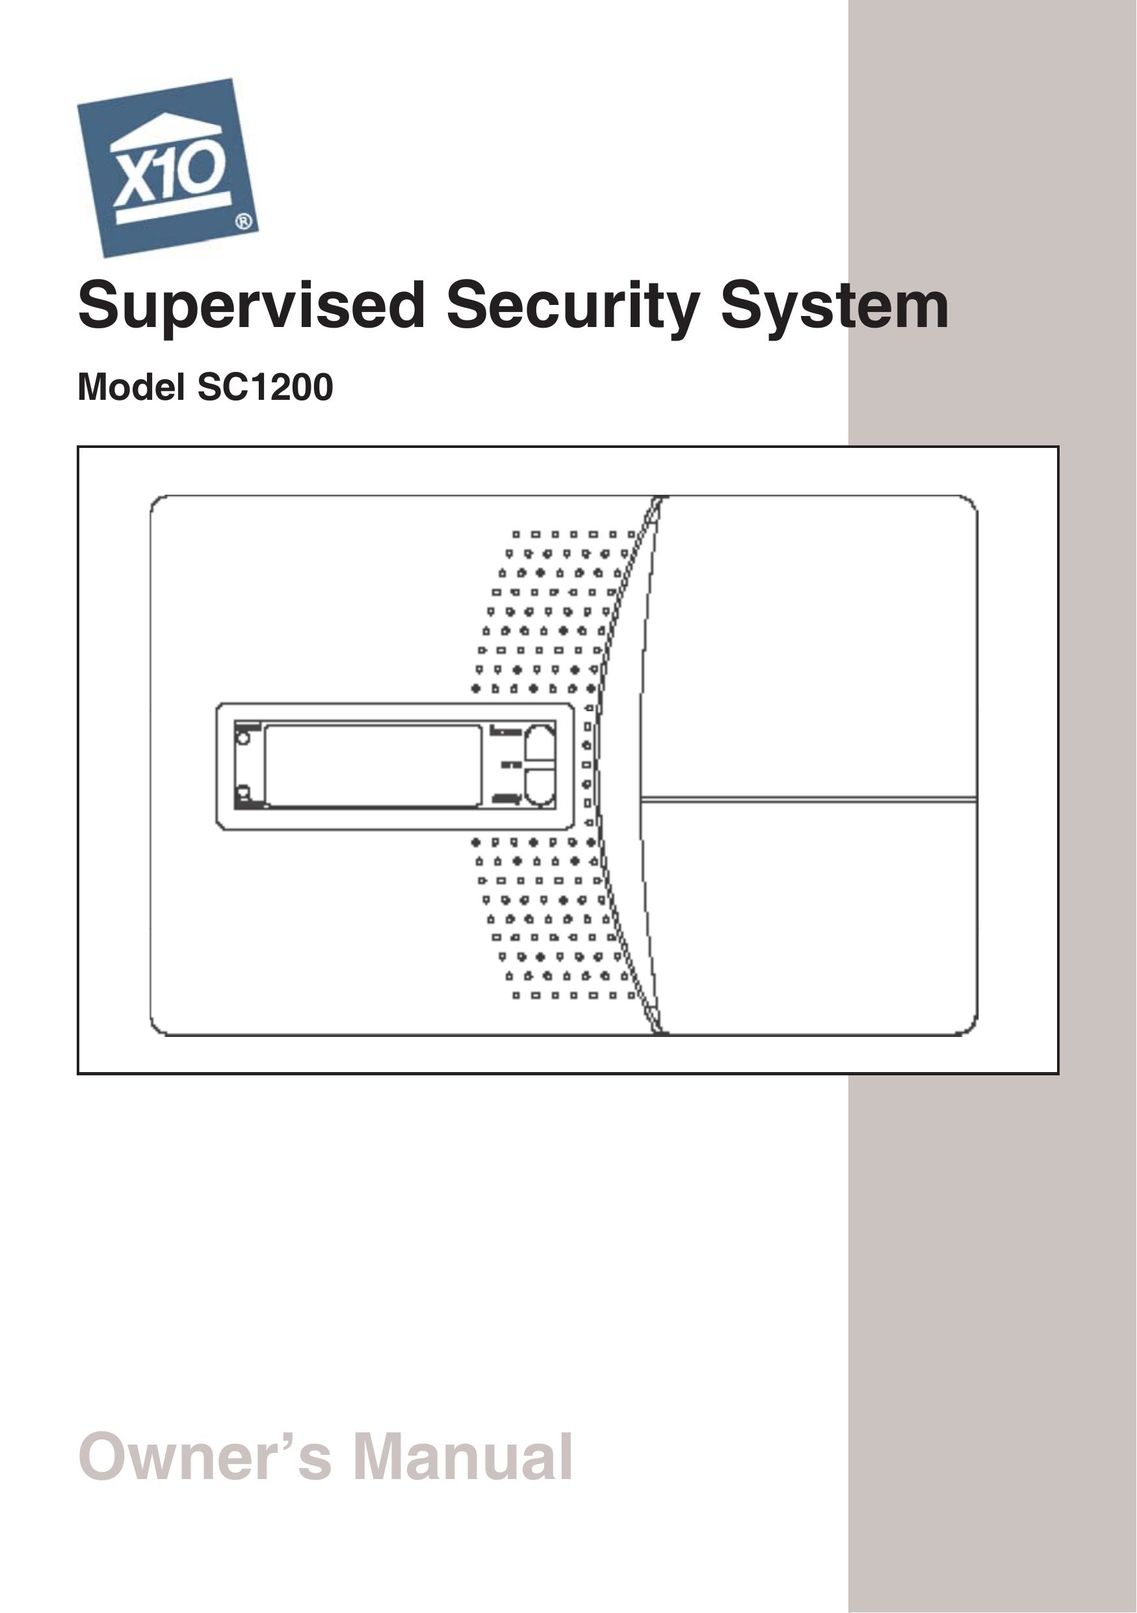 X10 Wireless Technology SC1200 Home Security System User Manual